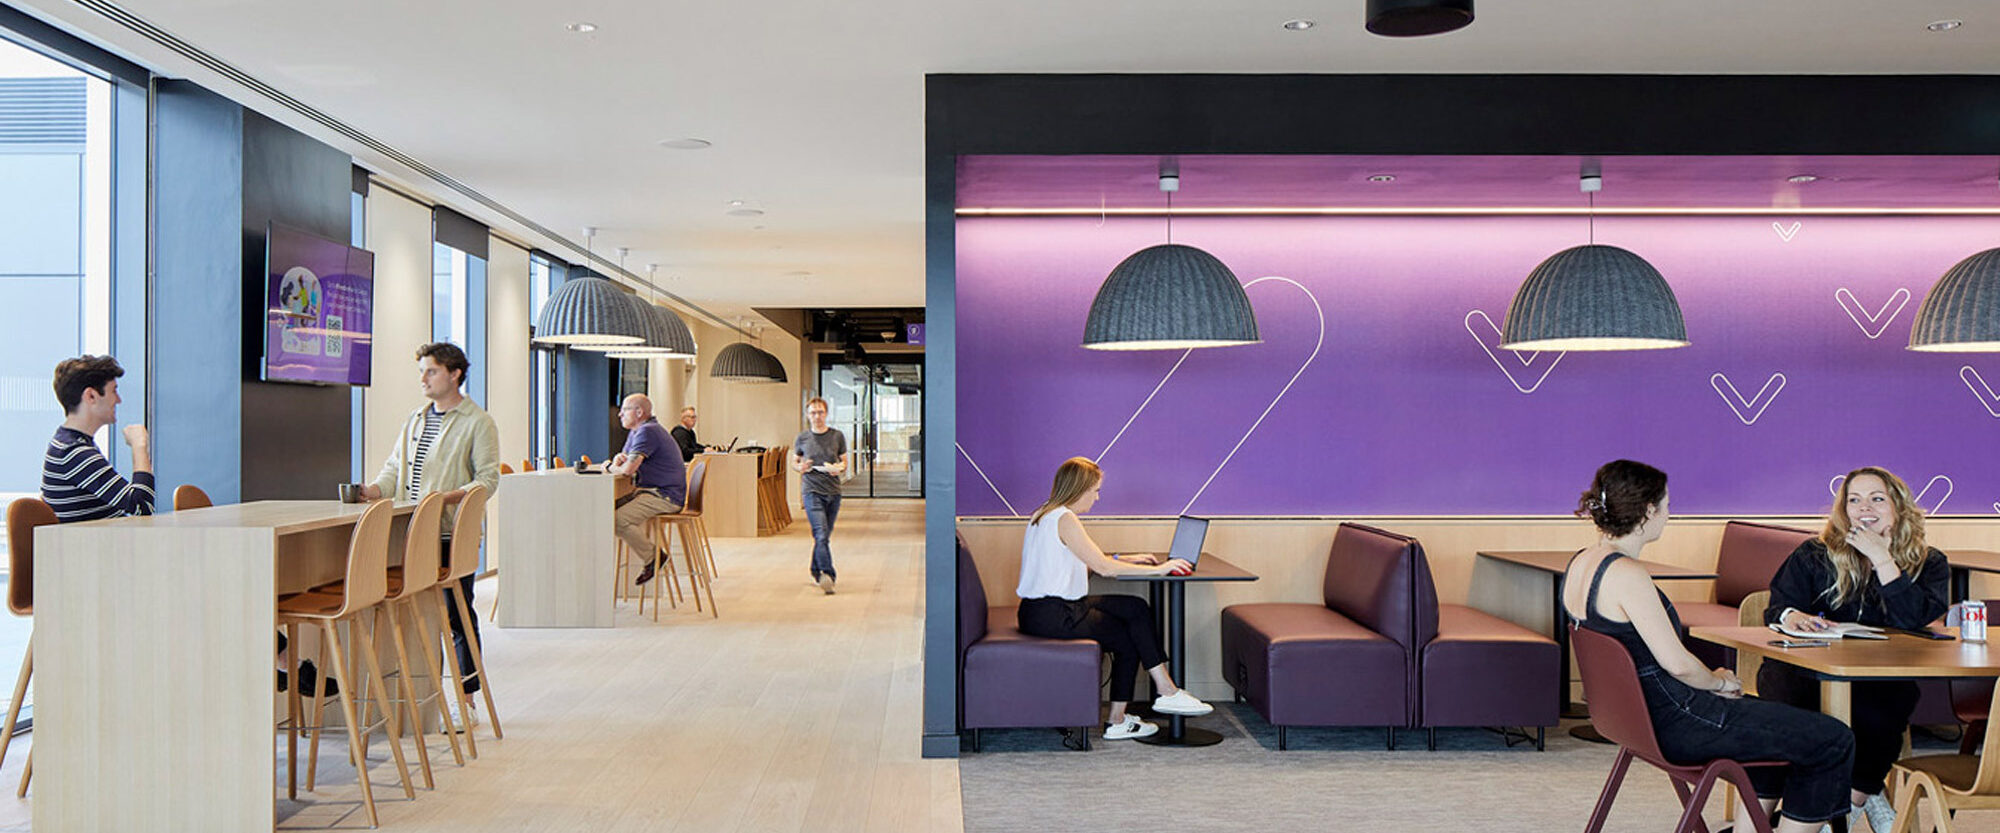 Modern office cafeteria with vibrant purple accent wall featuring playful line art, contrasted by natural wood tones and sleek furniture. Casual seating areas promote social interaction, complemented by ambient pendant lighting amidst an open, industrial ceiling design.